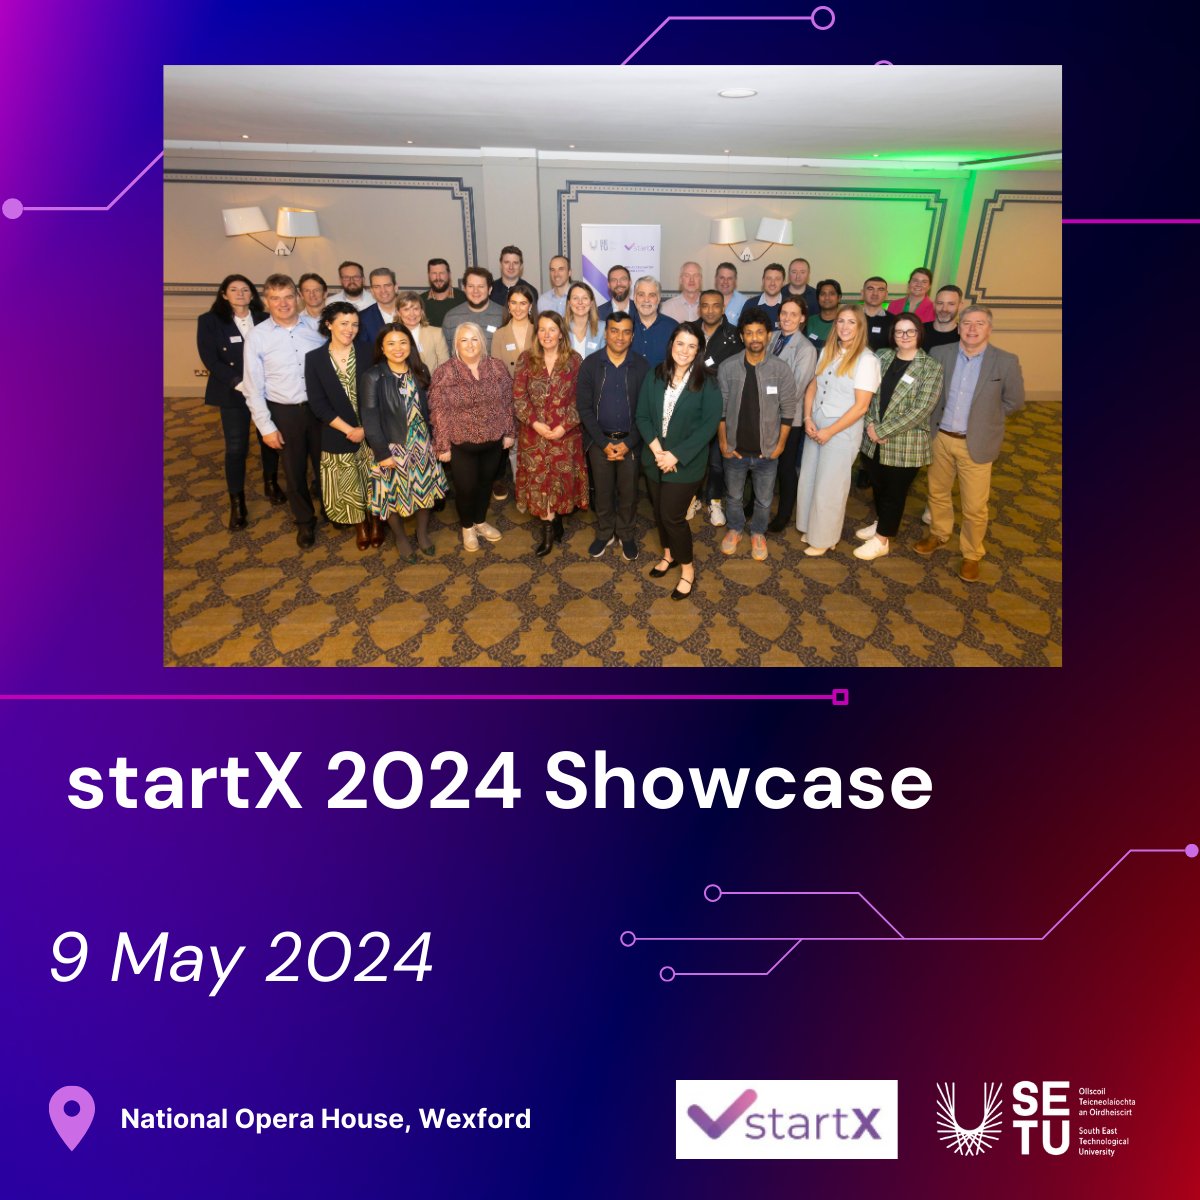 South East Technological University (SETU) is proud to announce the upcoming startX Showcase, marking the culmination of the groundbreaking startX innovation programme The startX Showcase promises to be an inspiring and insightful event, offering attendees the opportunity to…